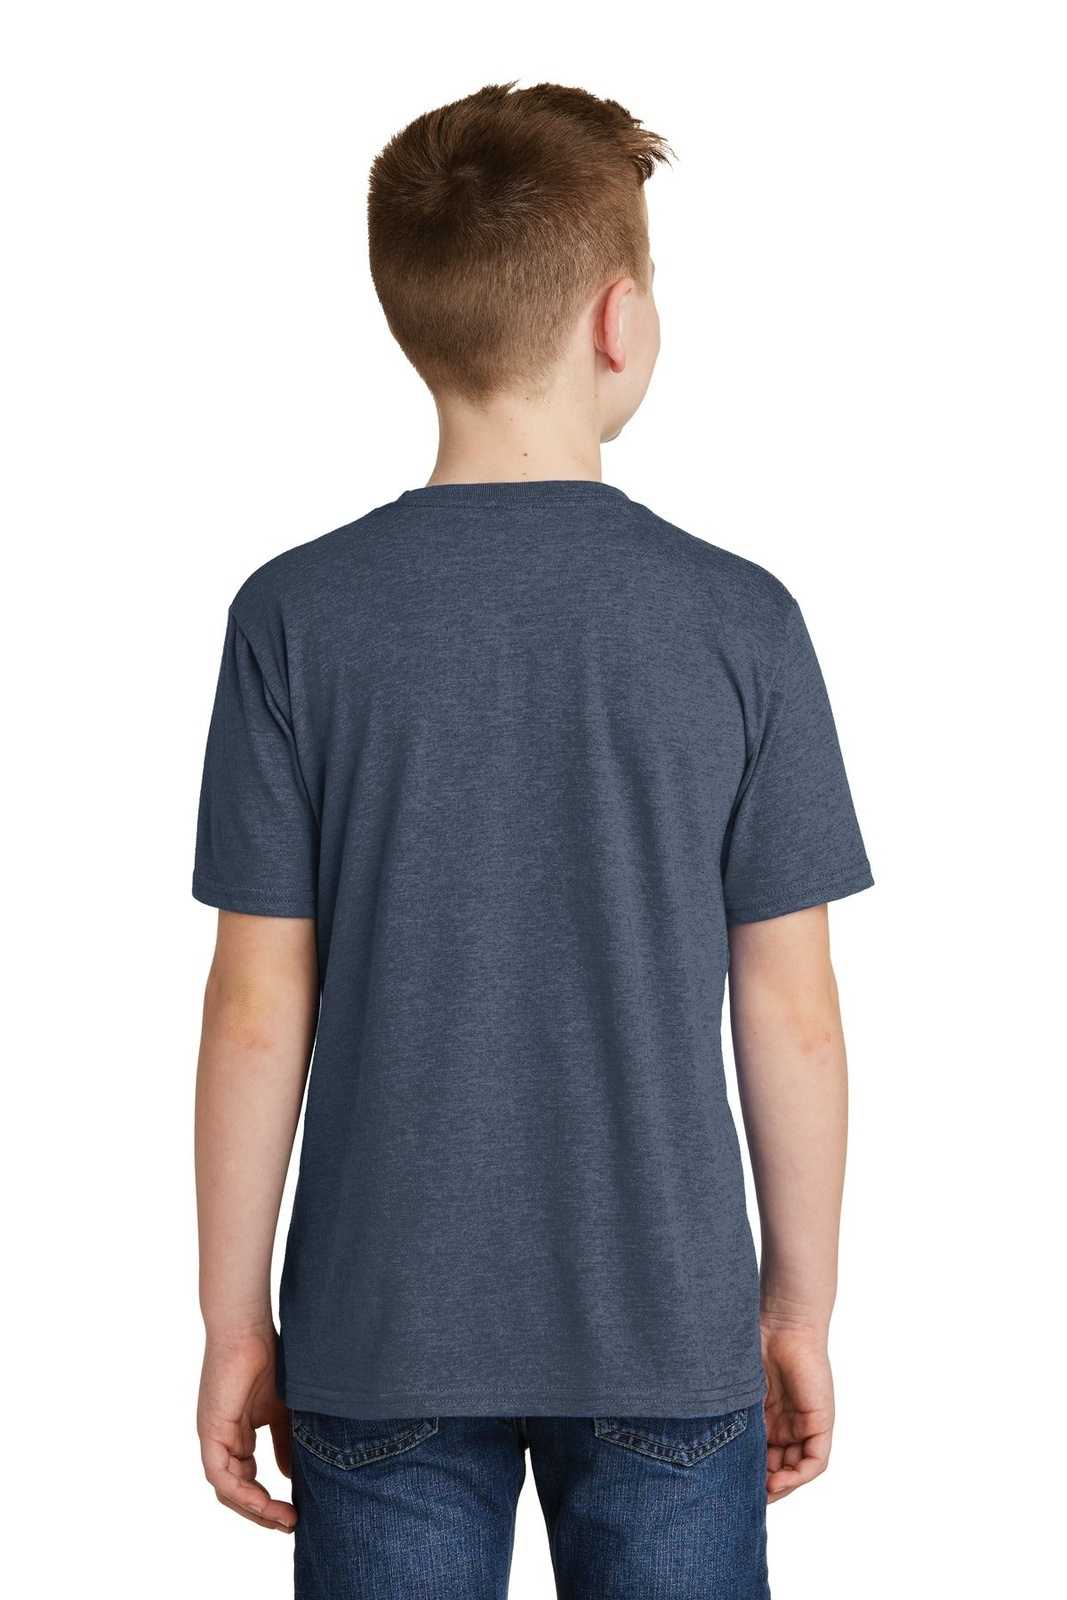 District DT6000Y Youth Very Important Tee - Heathered Navy - HIT a Double - 2